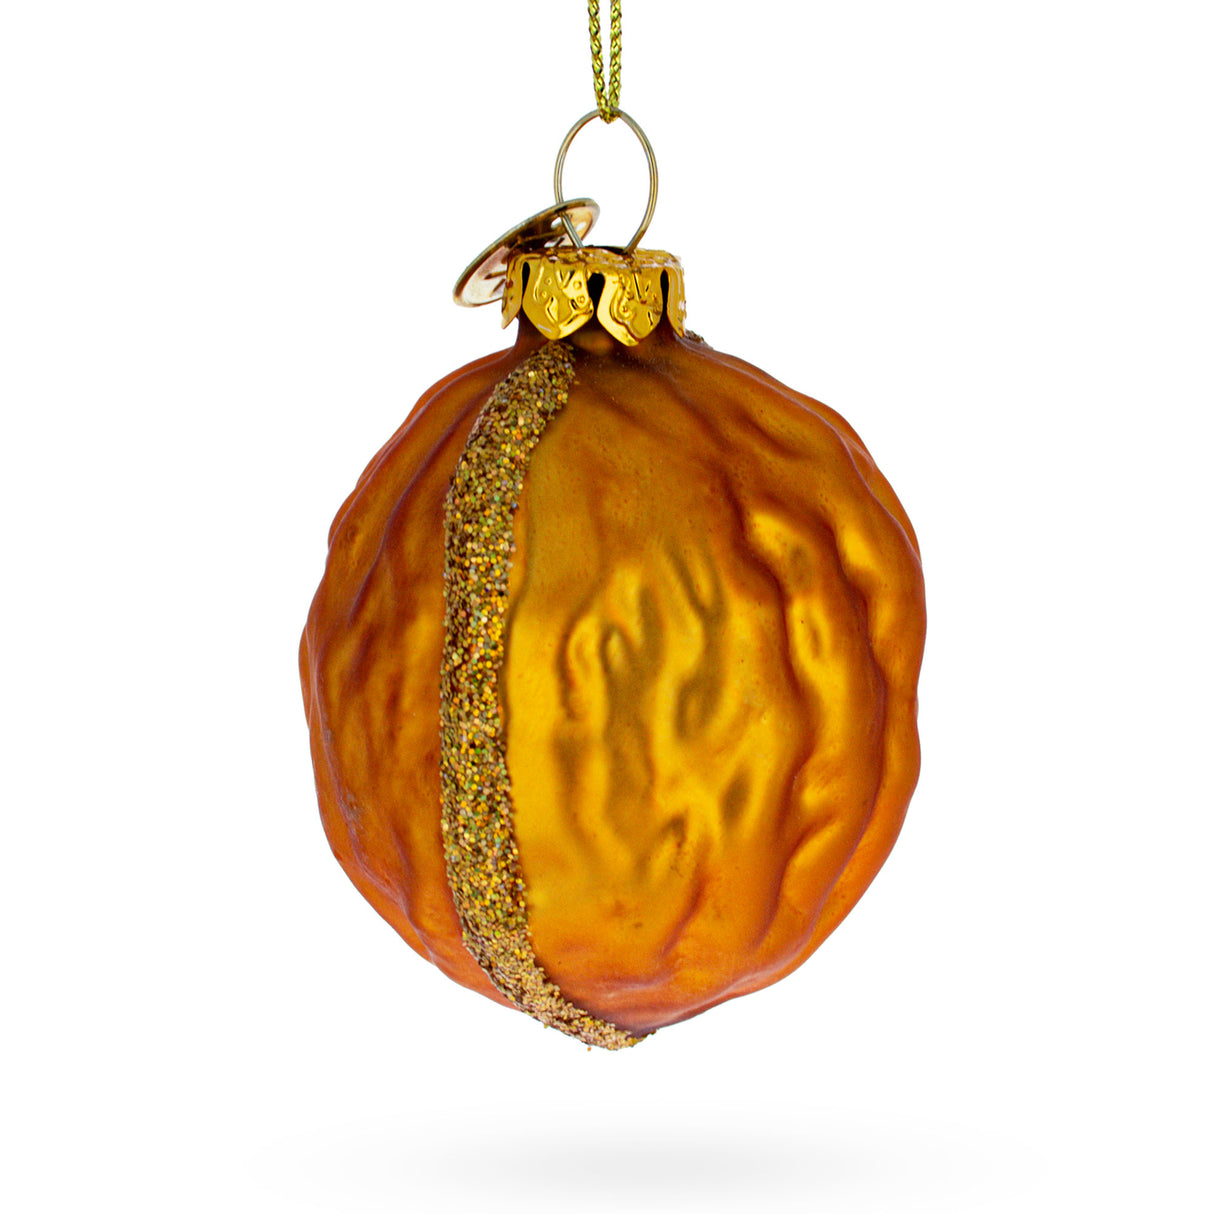 Realistic Walnut - Blown Glass Christmas Ornament in Brown color, Round shape